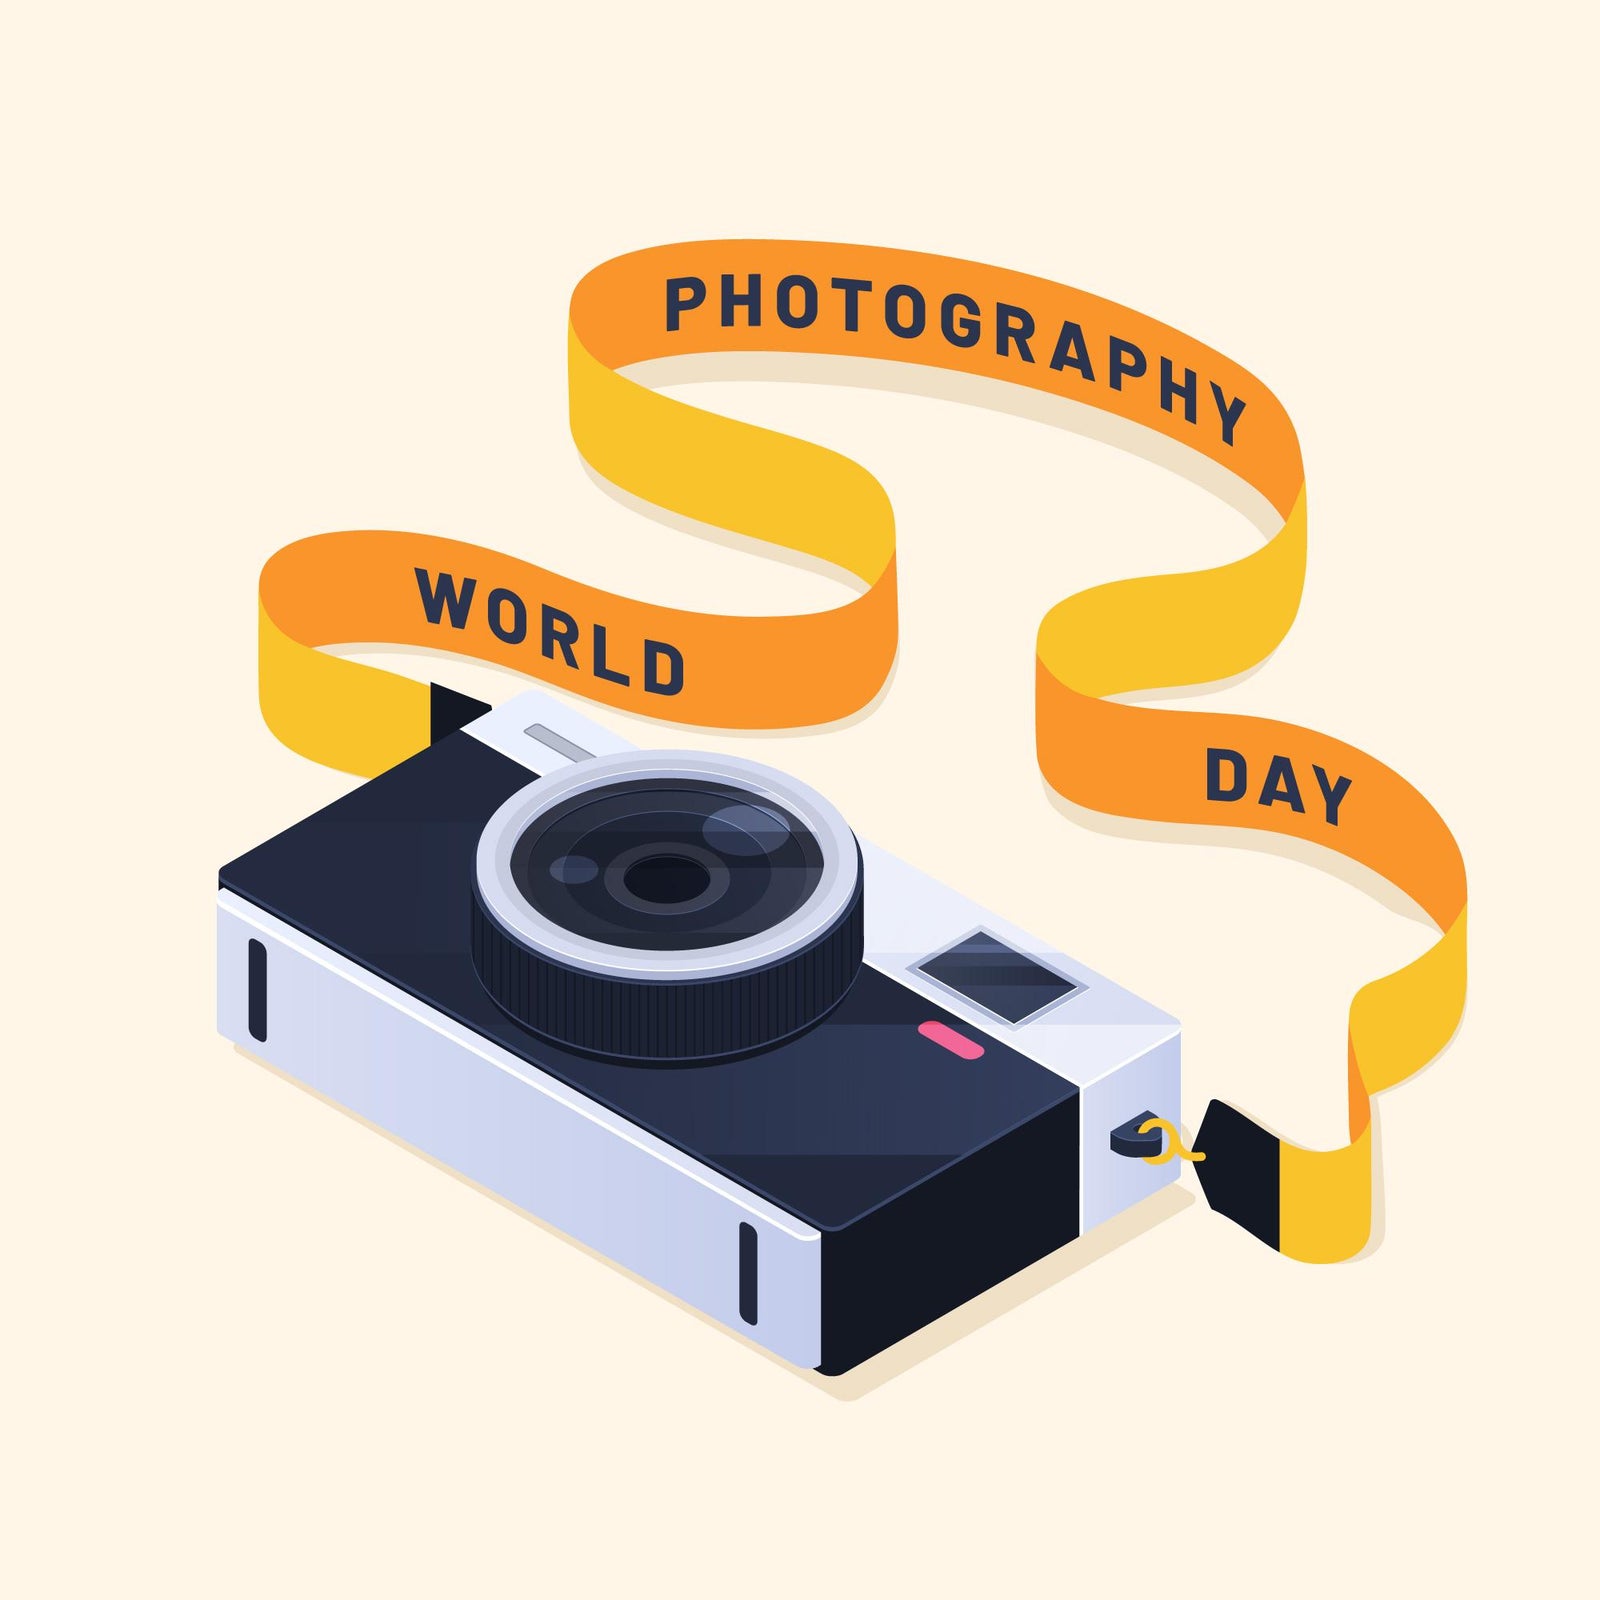 World Photography Day - 10 Mind-Blowing Facts About Photography & Camera